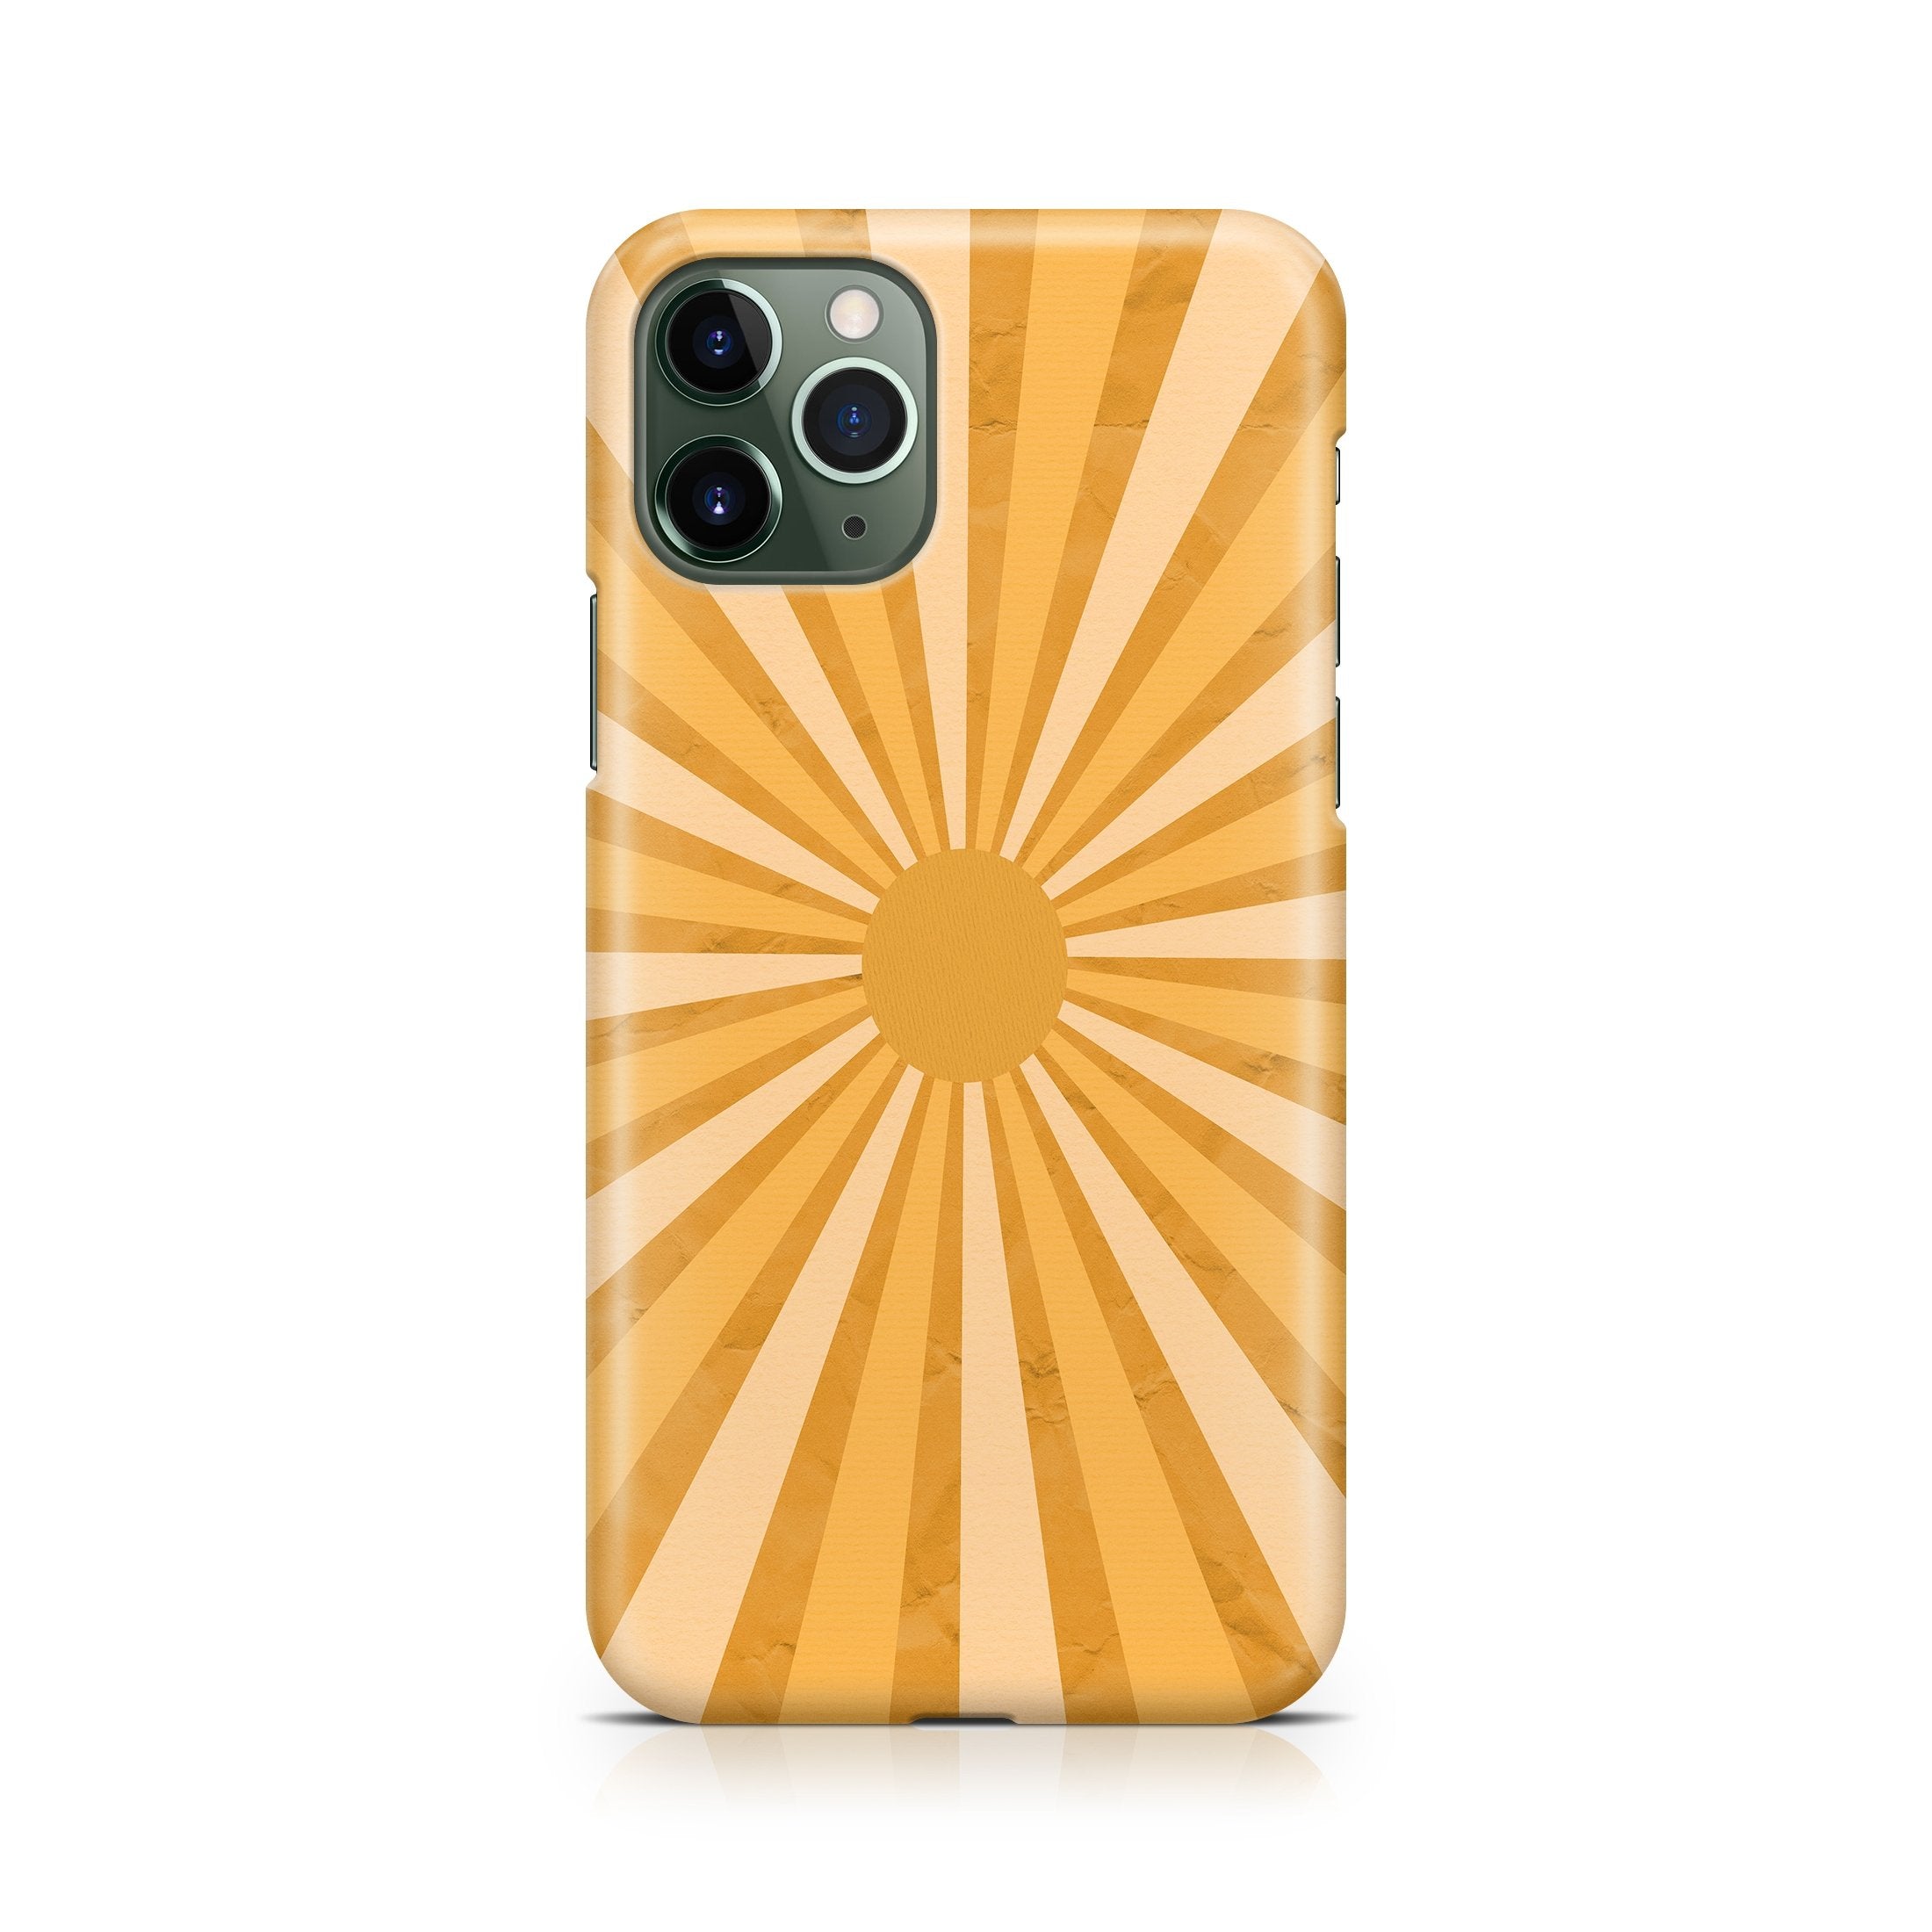 Retro Sunlight - iPhone phone case designs by CaseSwagger